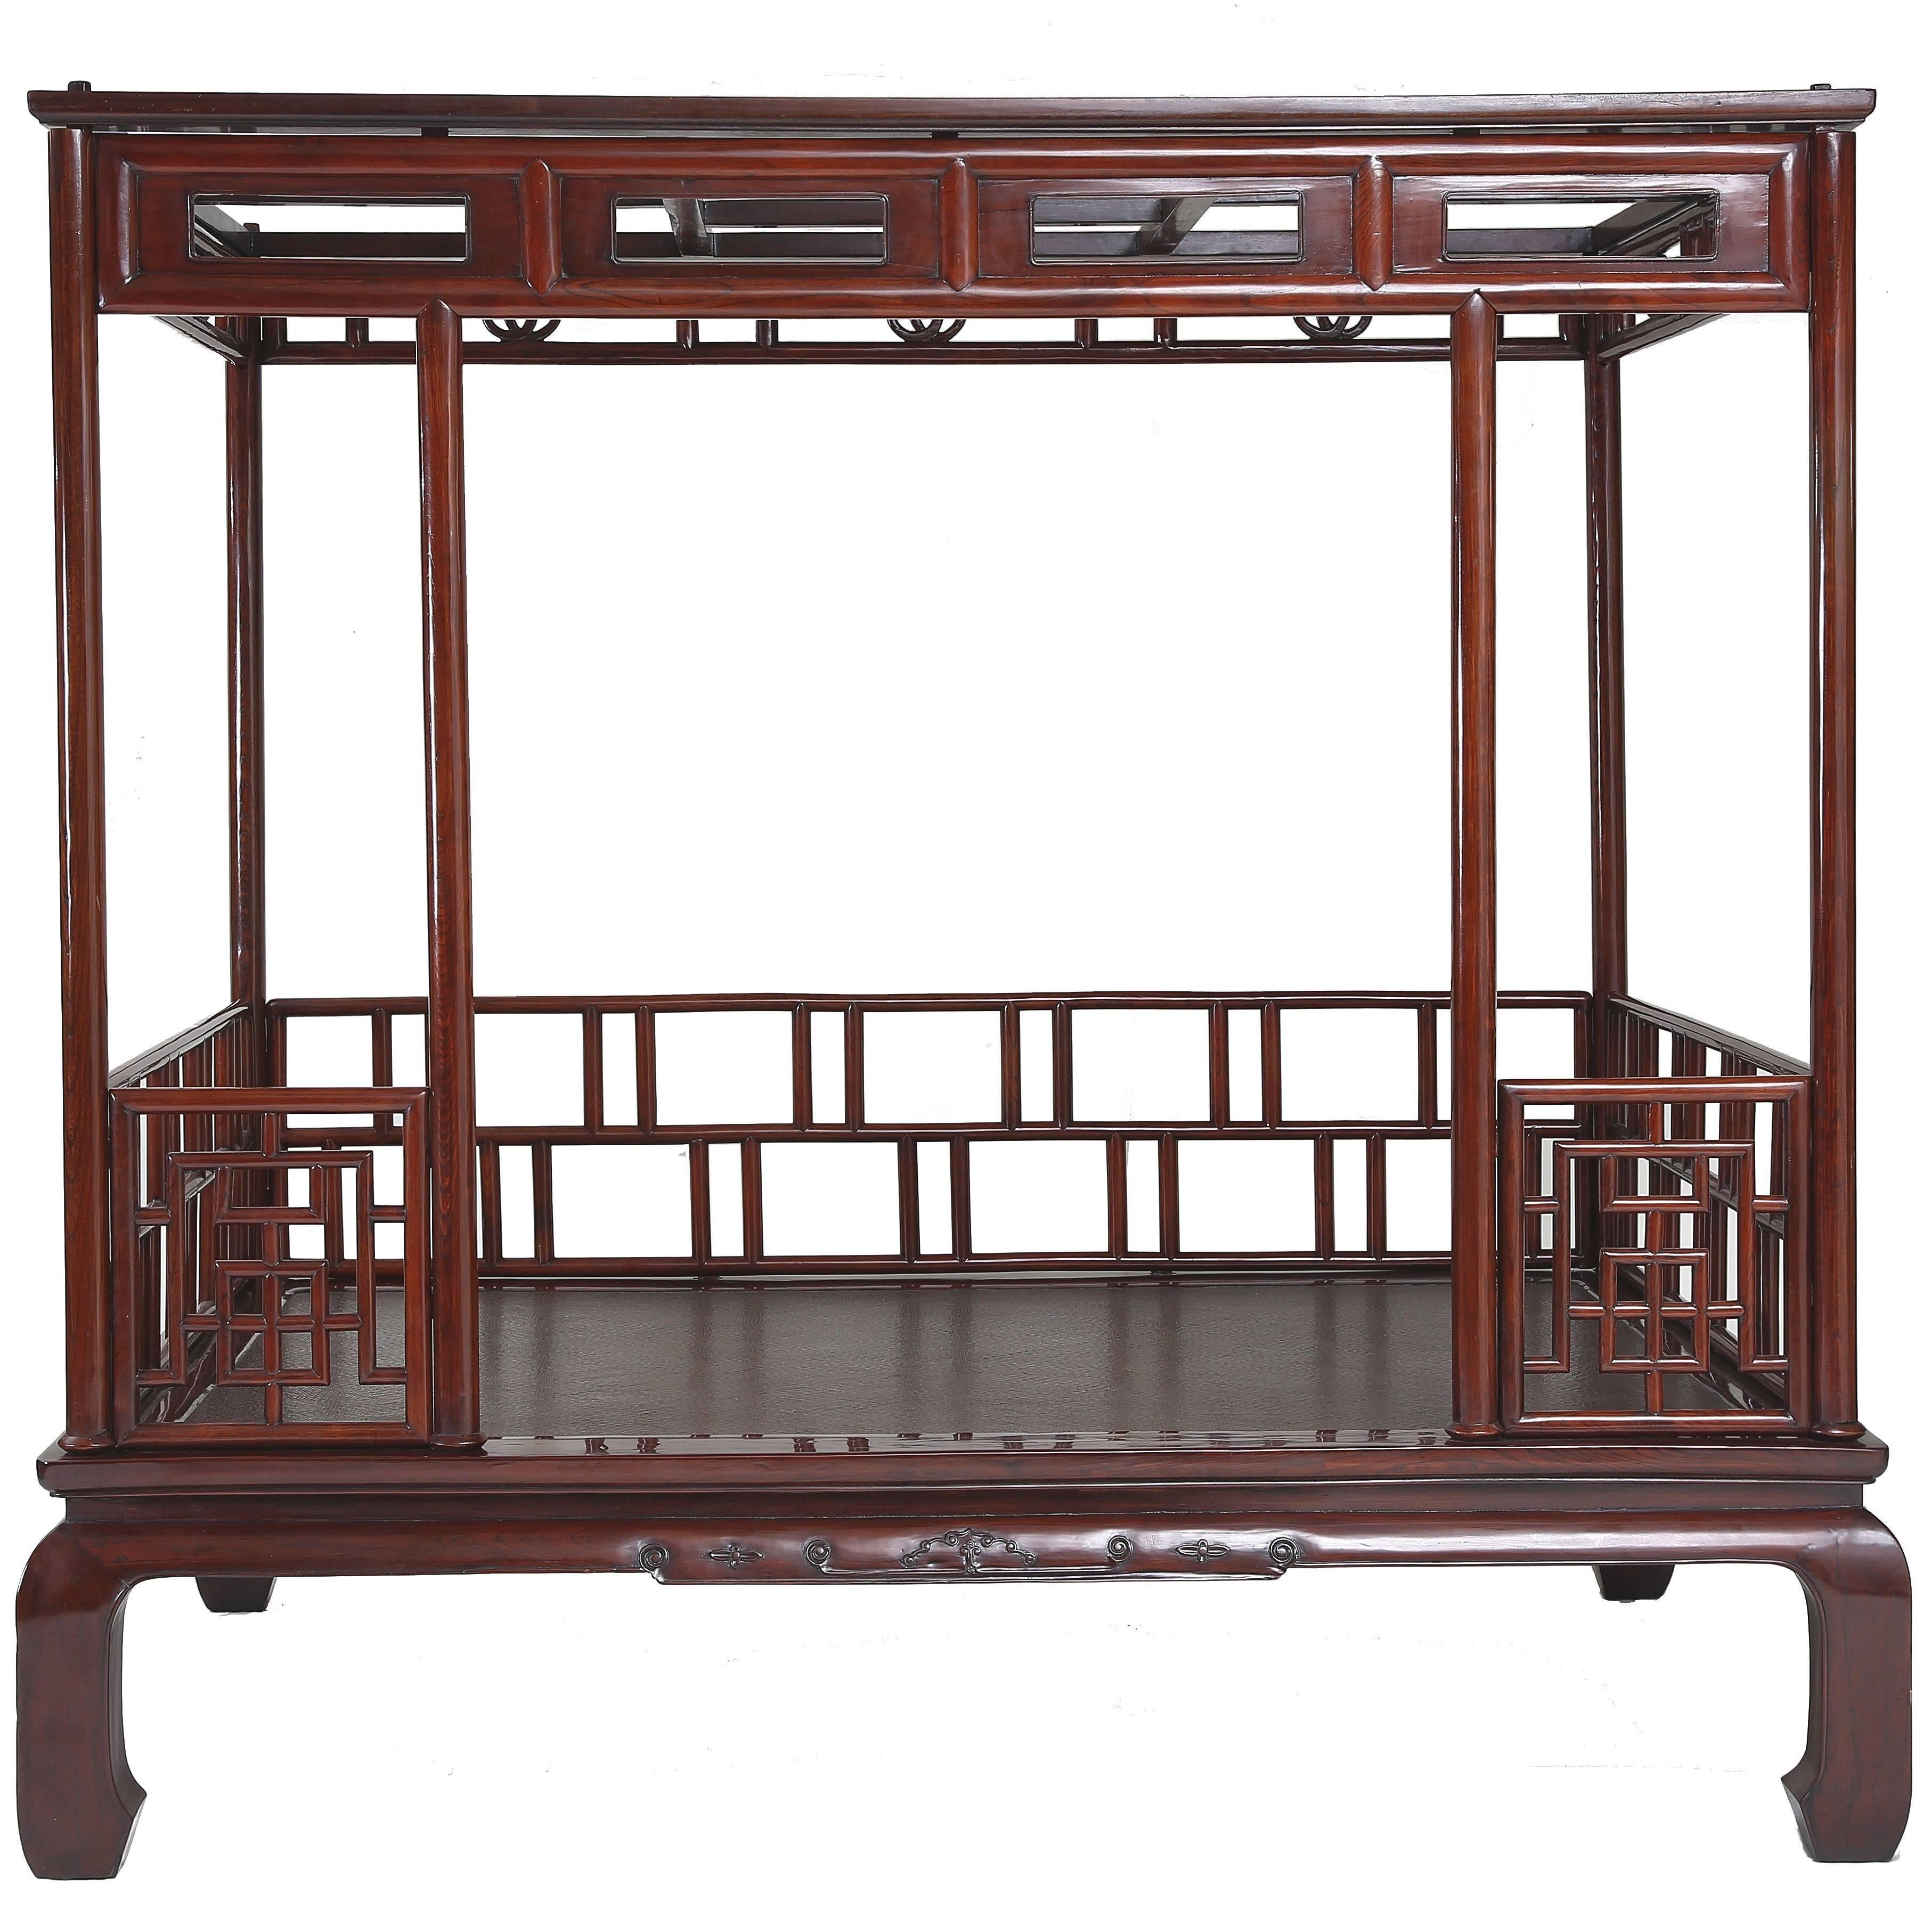 Antique Chinese L18th-Ey 19th Century Six Post Canopy Bed, Chinoiserie, Zhejiang